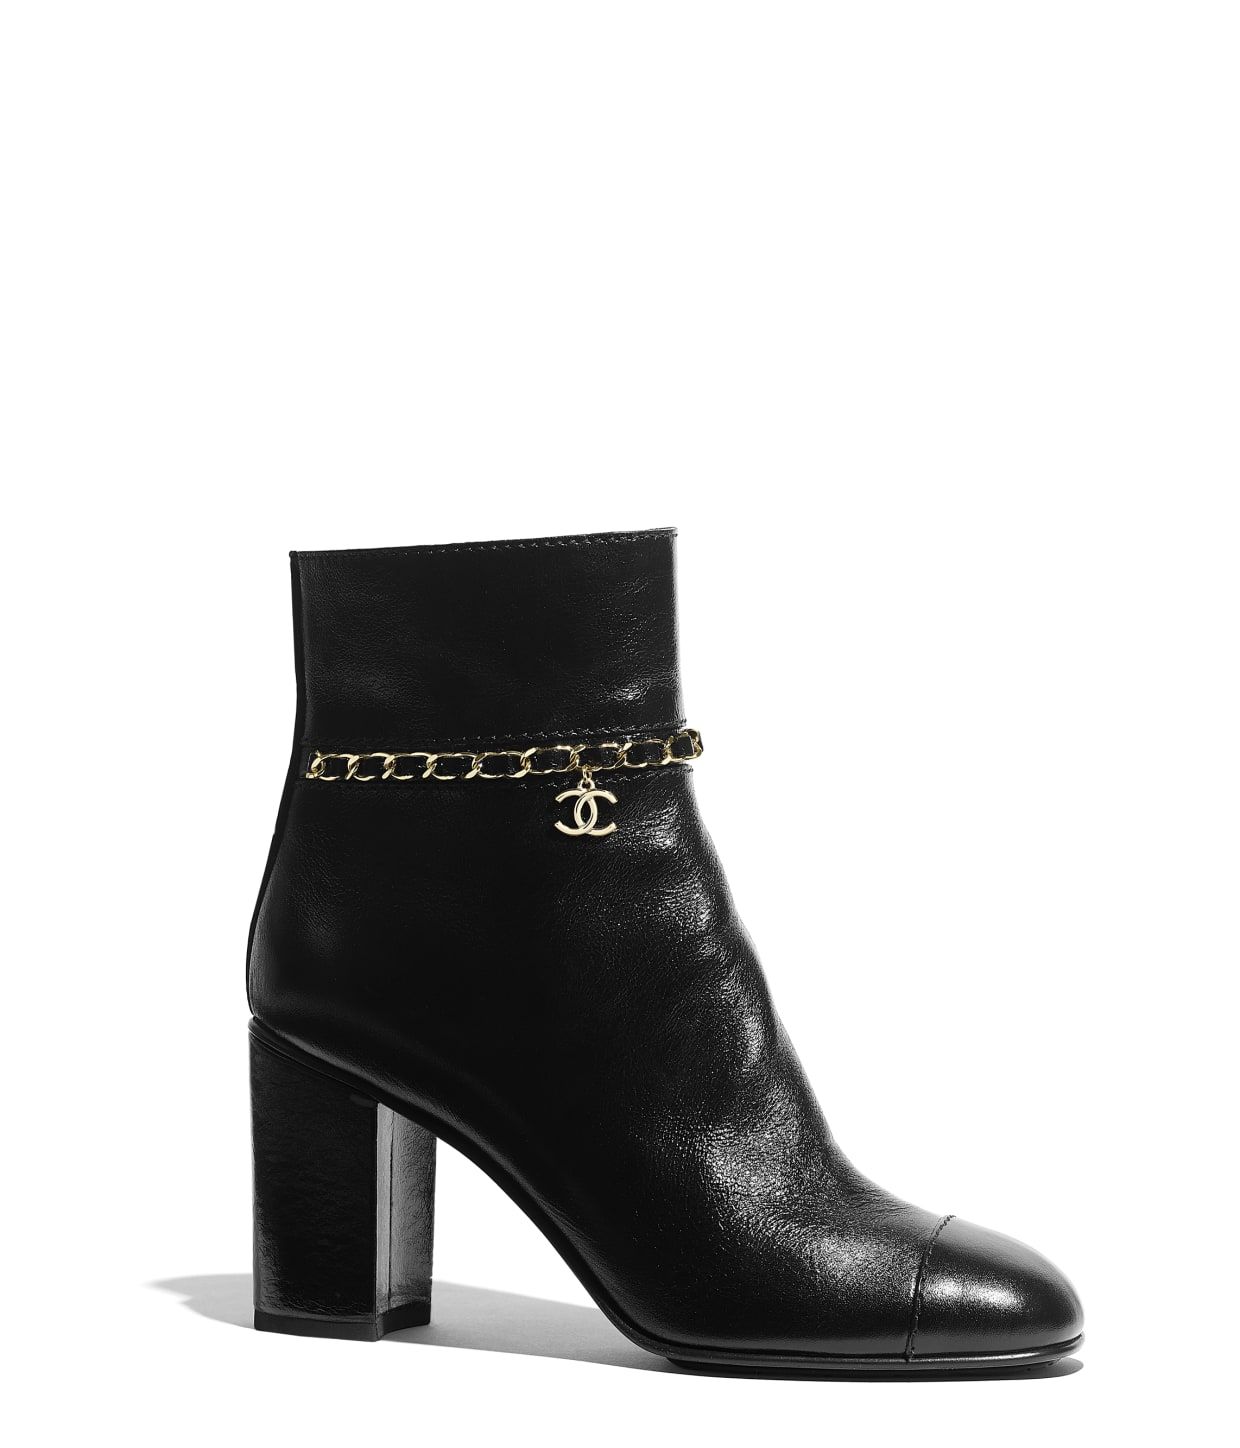 Calfskin Black Ankle Boots | CHANEL | Chanel, Inc. (US)